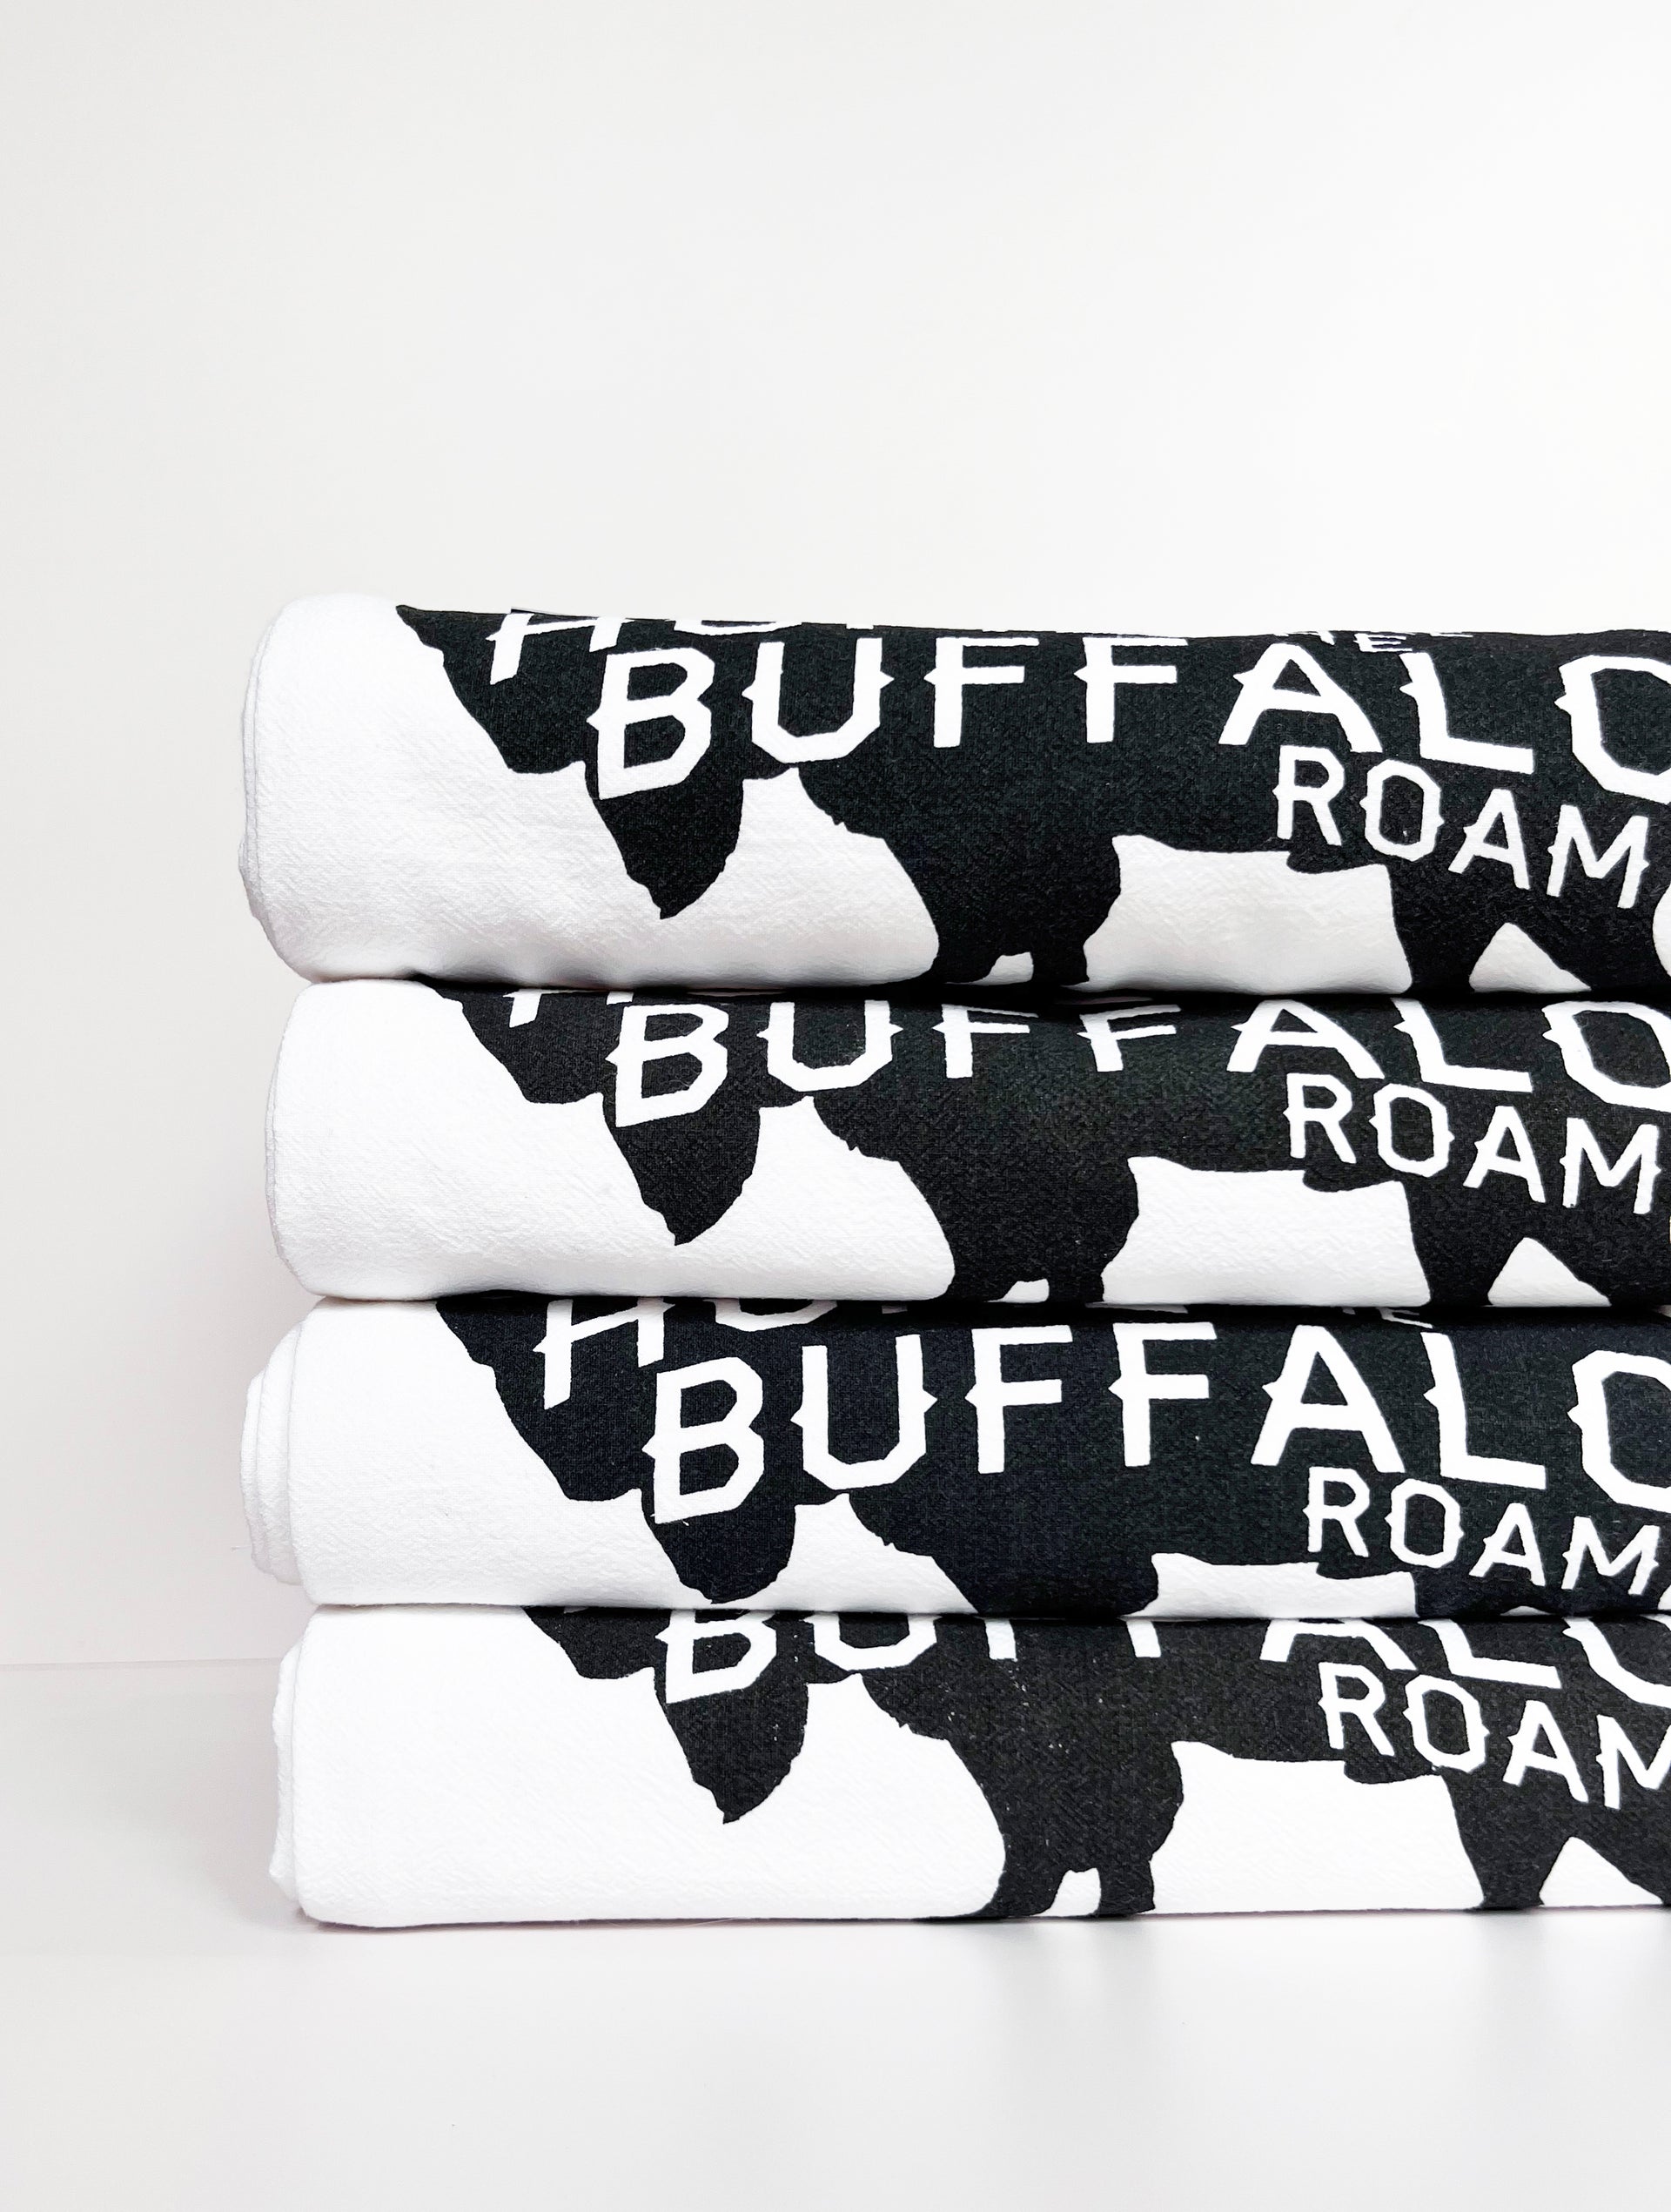 All Cotton and Linen Kitchen Towels, Cotton Dish Towels, Buffalo